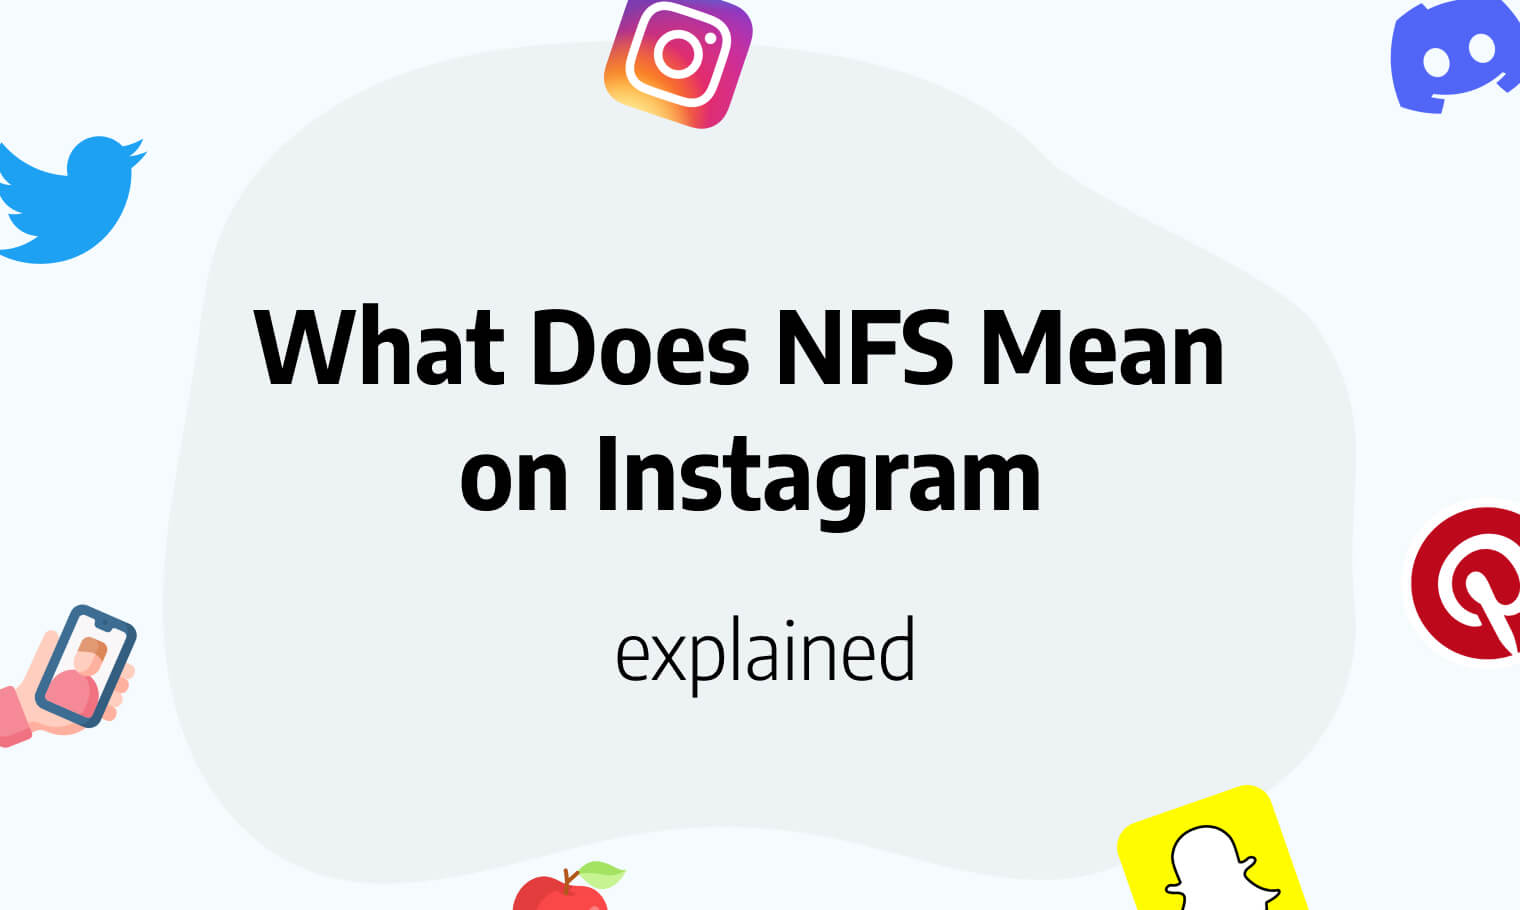 what does NFS mean instagram